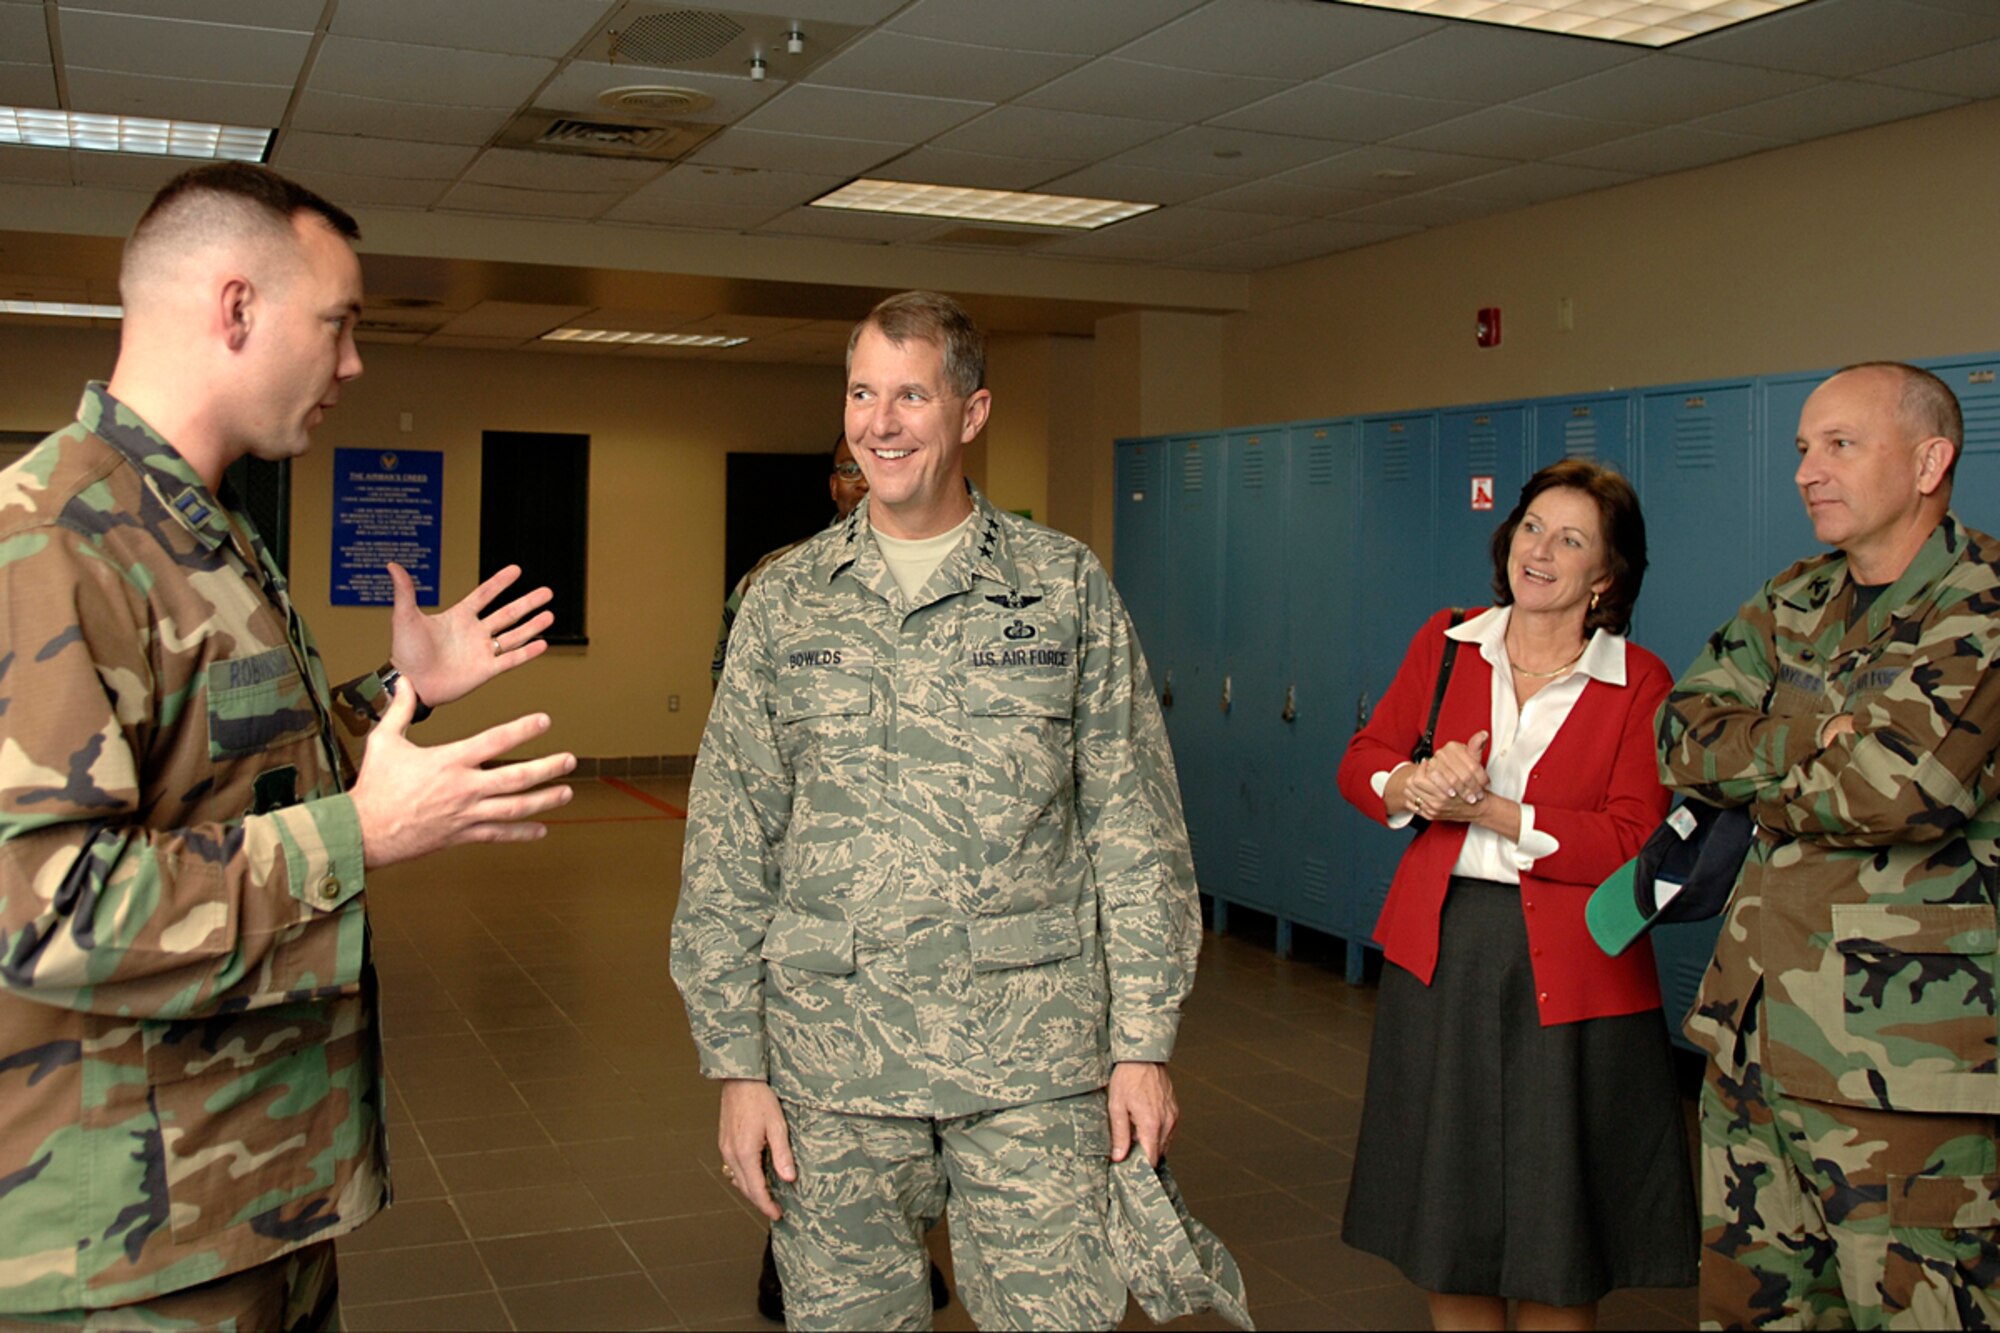 HANSCOM AIR FORCE BASE, Mass. -- Electronic Systems Center Commander Lt. Gen. Ted Bowlds and his wife Marcia, along with Col. Robert Boyles, 66th Mission Support Group commander, listen as Capt. Christopher Robinson, 66th Security Forces Squadron Operations and Training officer, explains his unit’s mission during a visit to the squadron during a base orientation tour Nov. 16.  The general took command of ESC Nov. 7. (U.S. Air Force photo by Jan Abate)